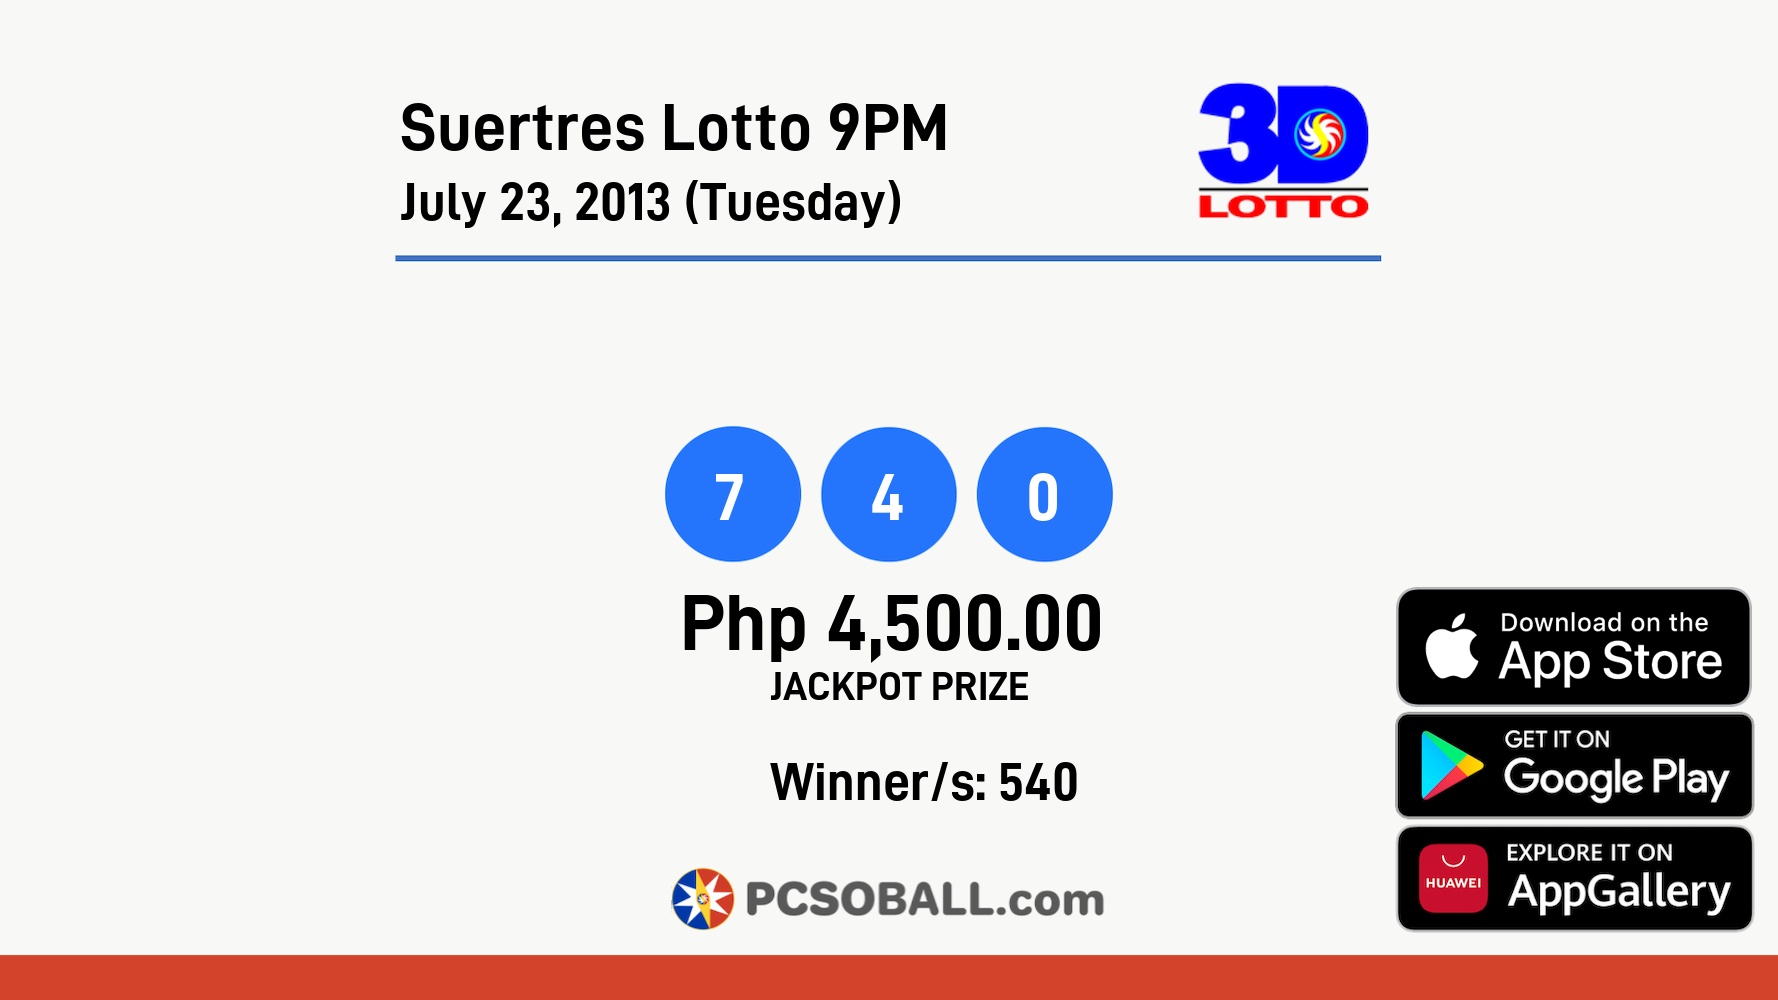 Suertres Lotto 9PM July 23, 2013 (Tuesday) Result